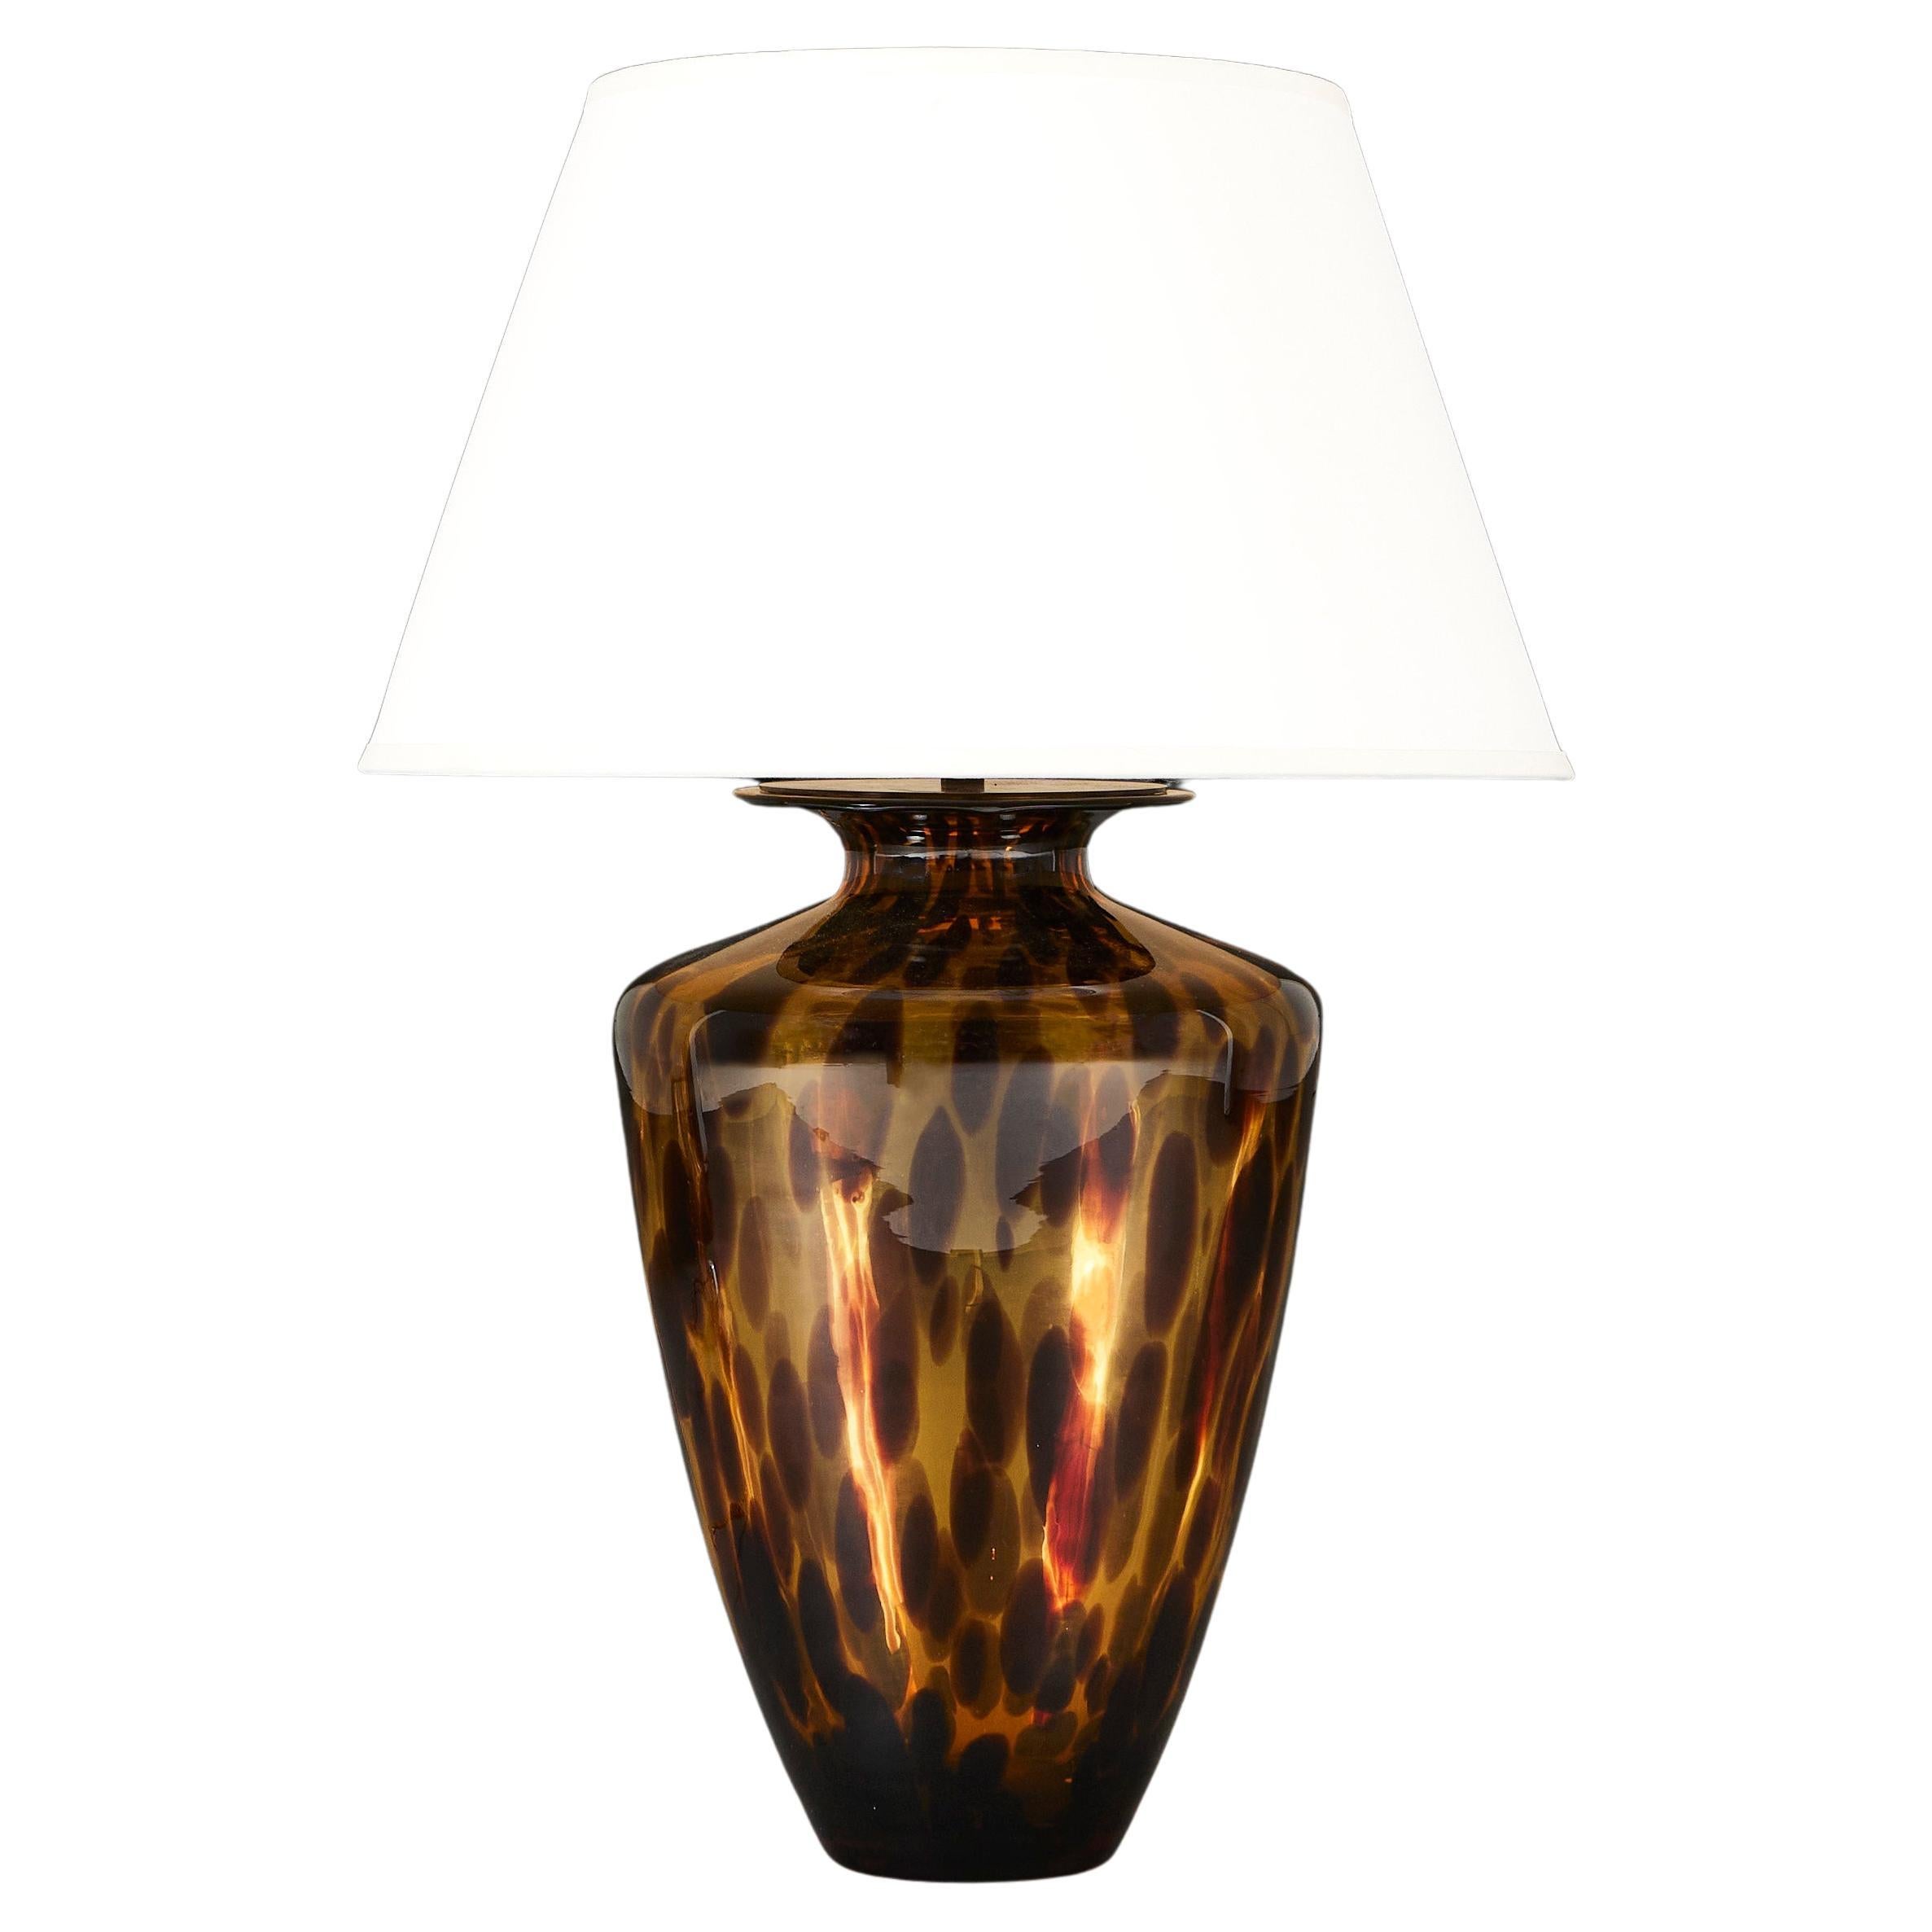 A Murano Tortoise Shell Glass Vase As A Lamp